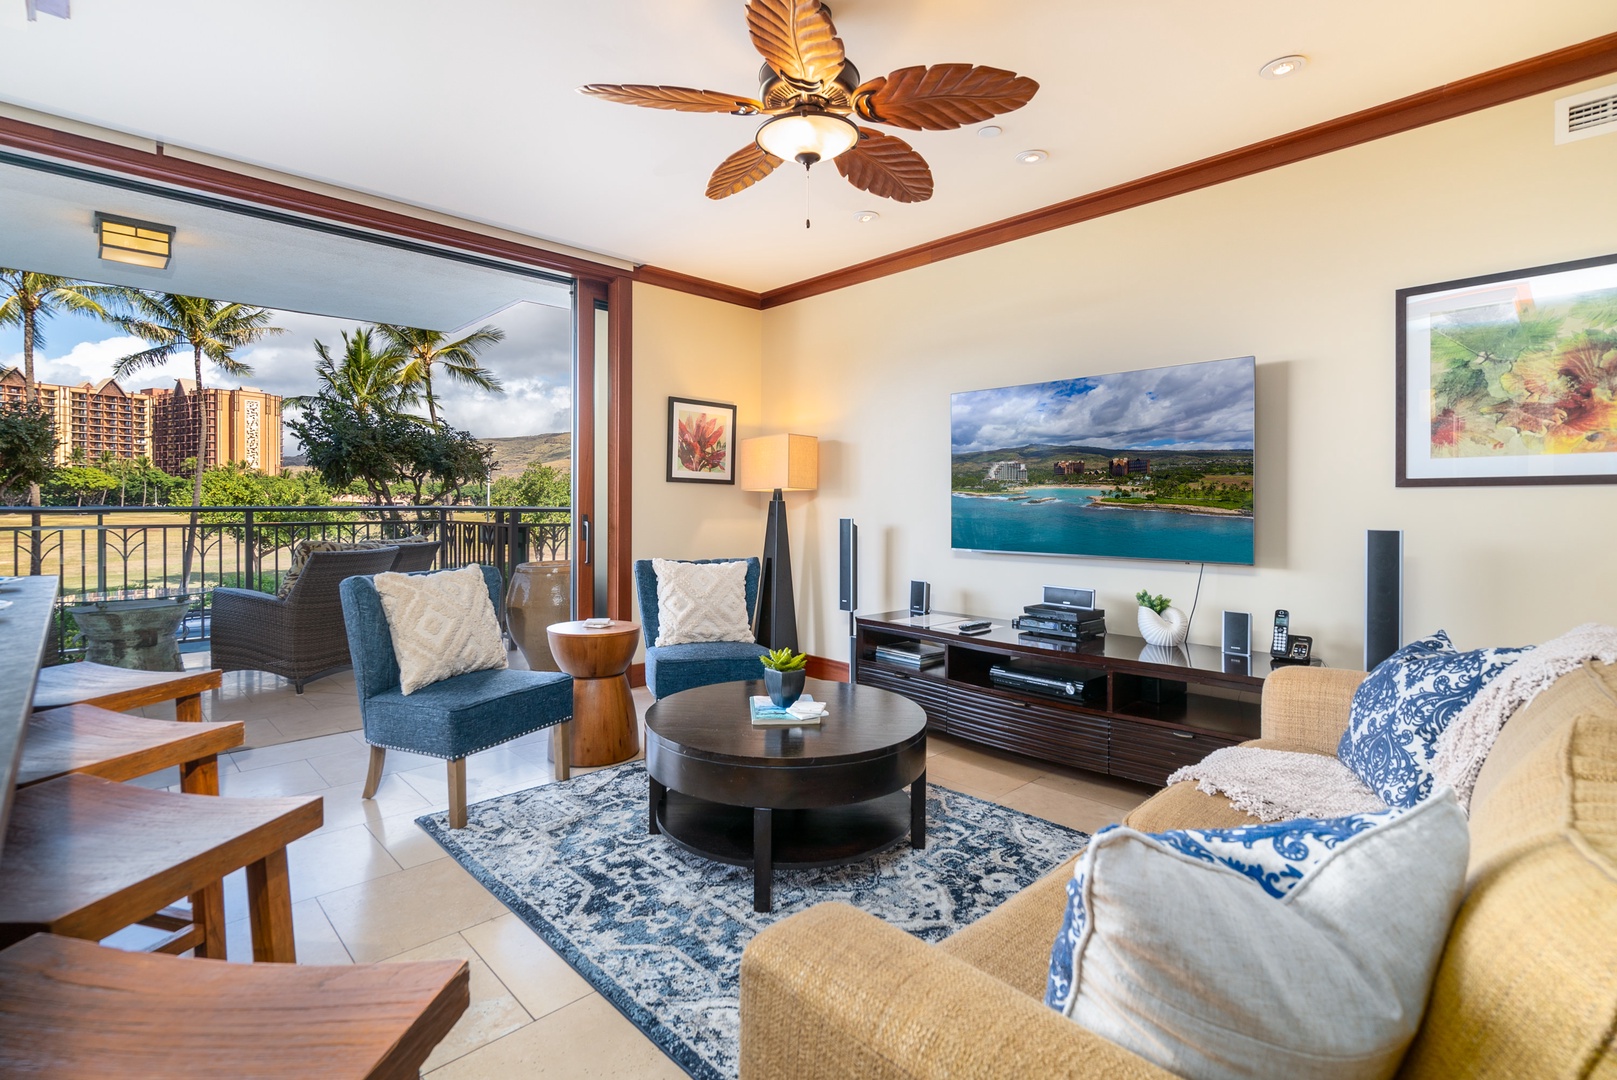 Spacious living area with a private lanai for incredible indoor-outdoor living